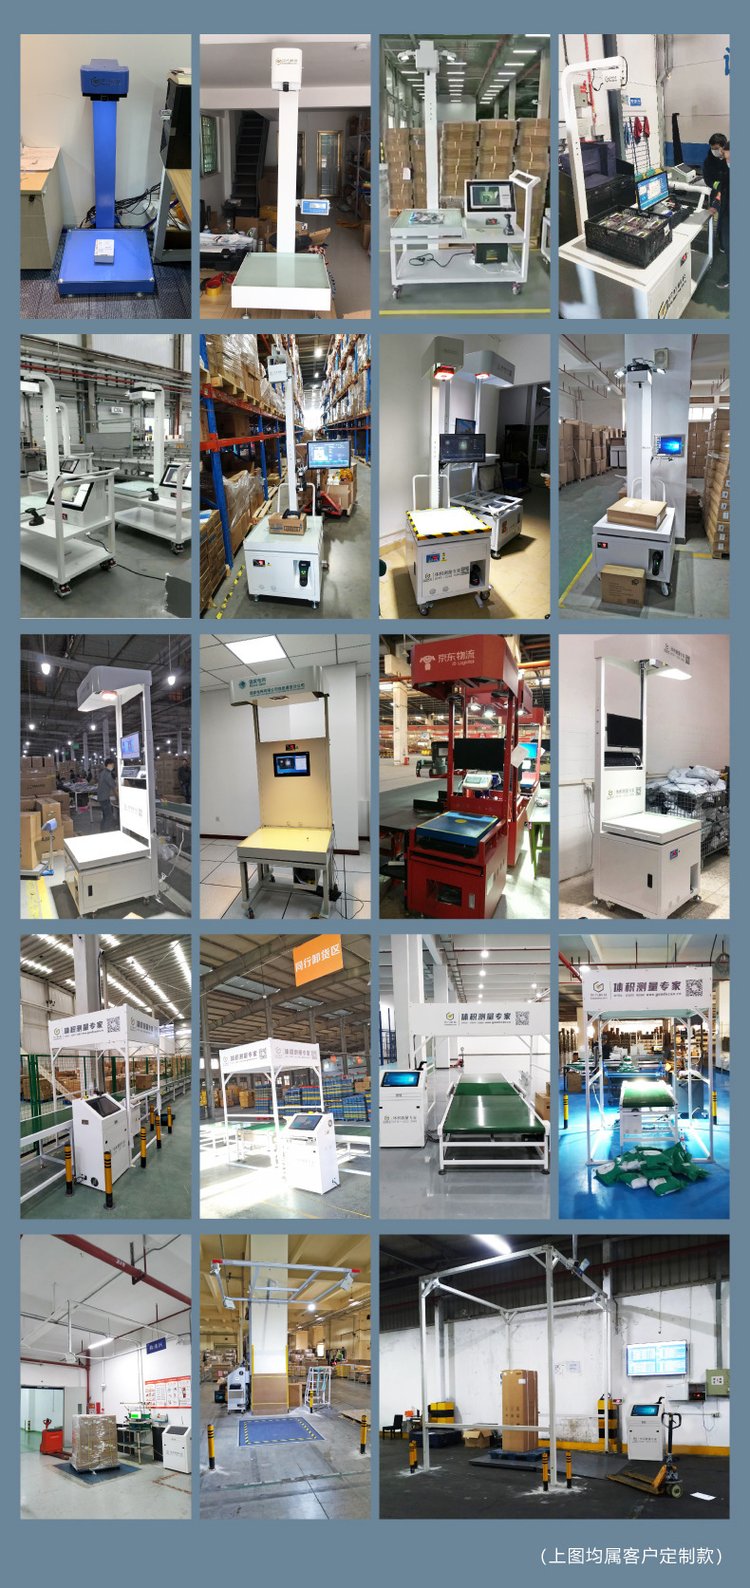 Scanning, weighing, and reading codes for e-commerce logistics express package assembly line_ Fast Dynamic DWS_ Volume measurement equipment